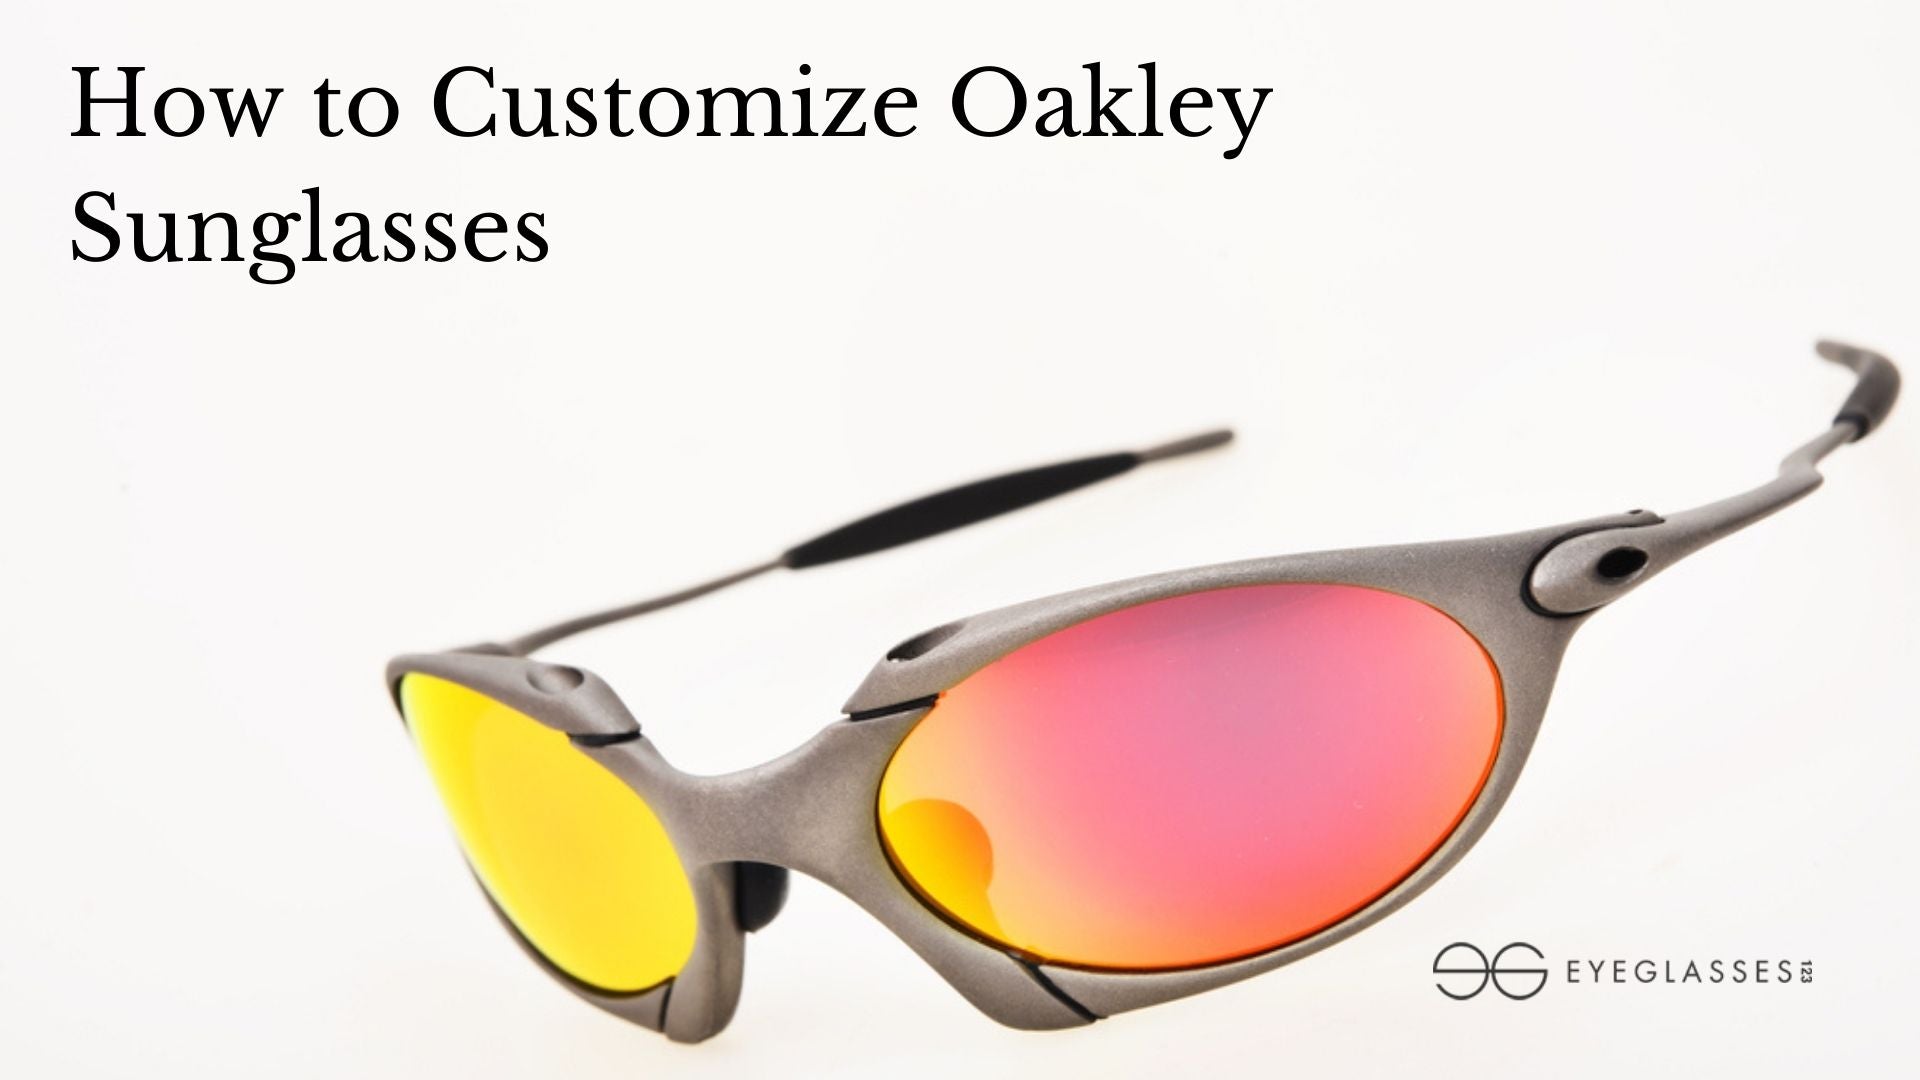 How to Customize Oakley Sunglasses